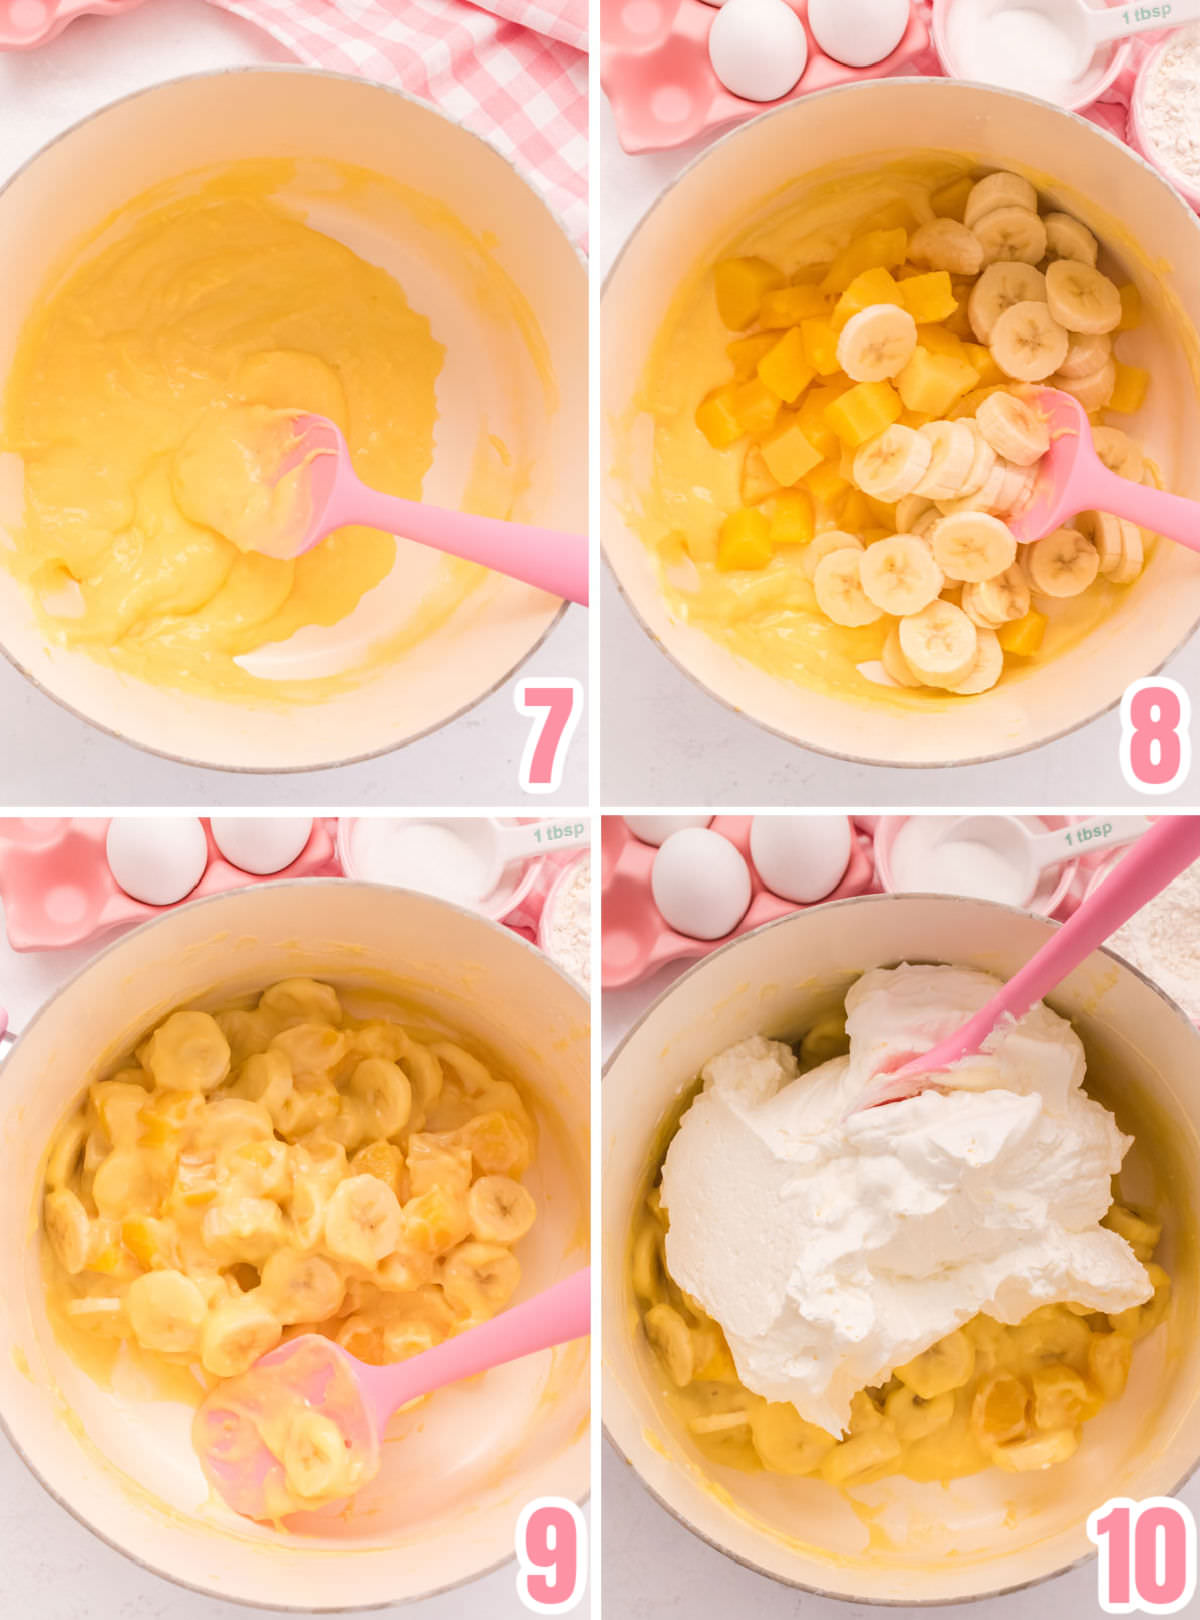 Collage image showing the steps for finishing the Pineapple Banana Fluff after the custard mixture has cooled.